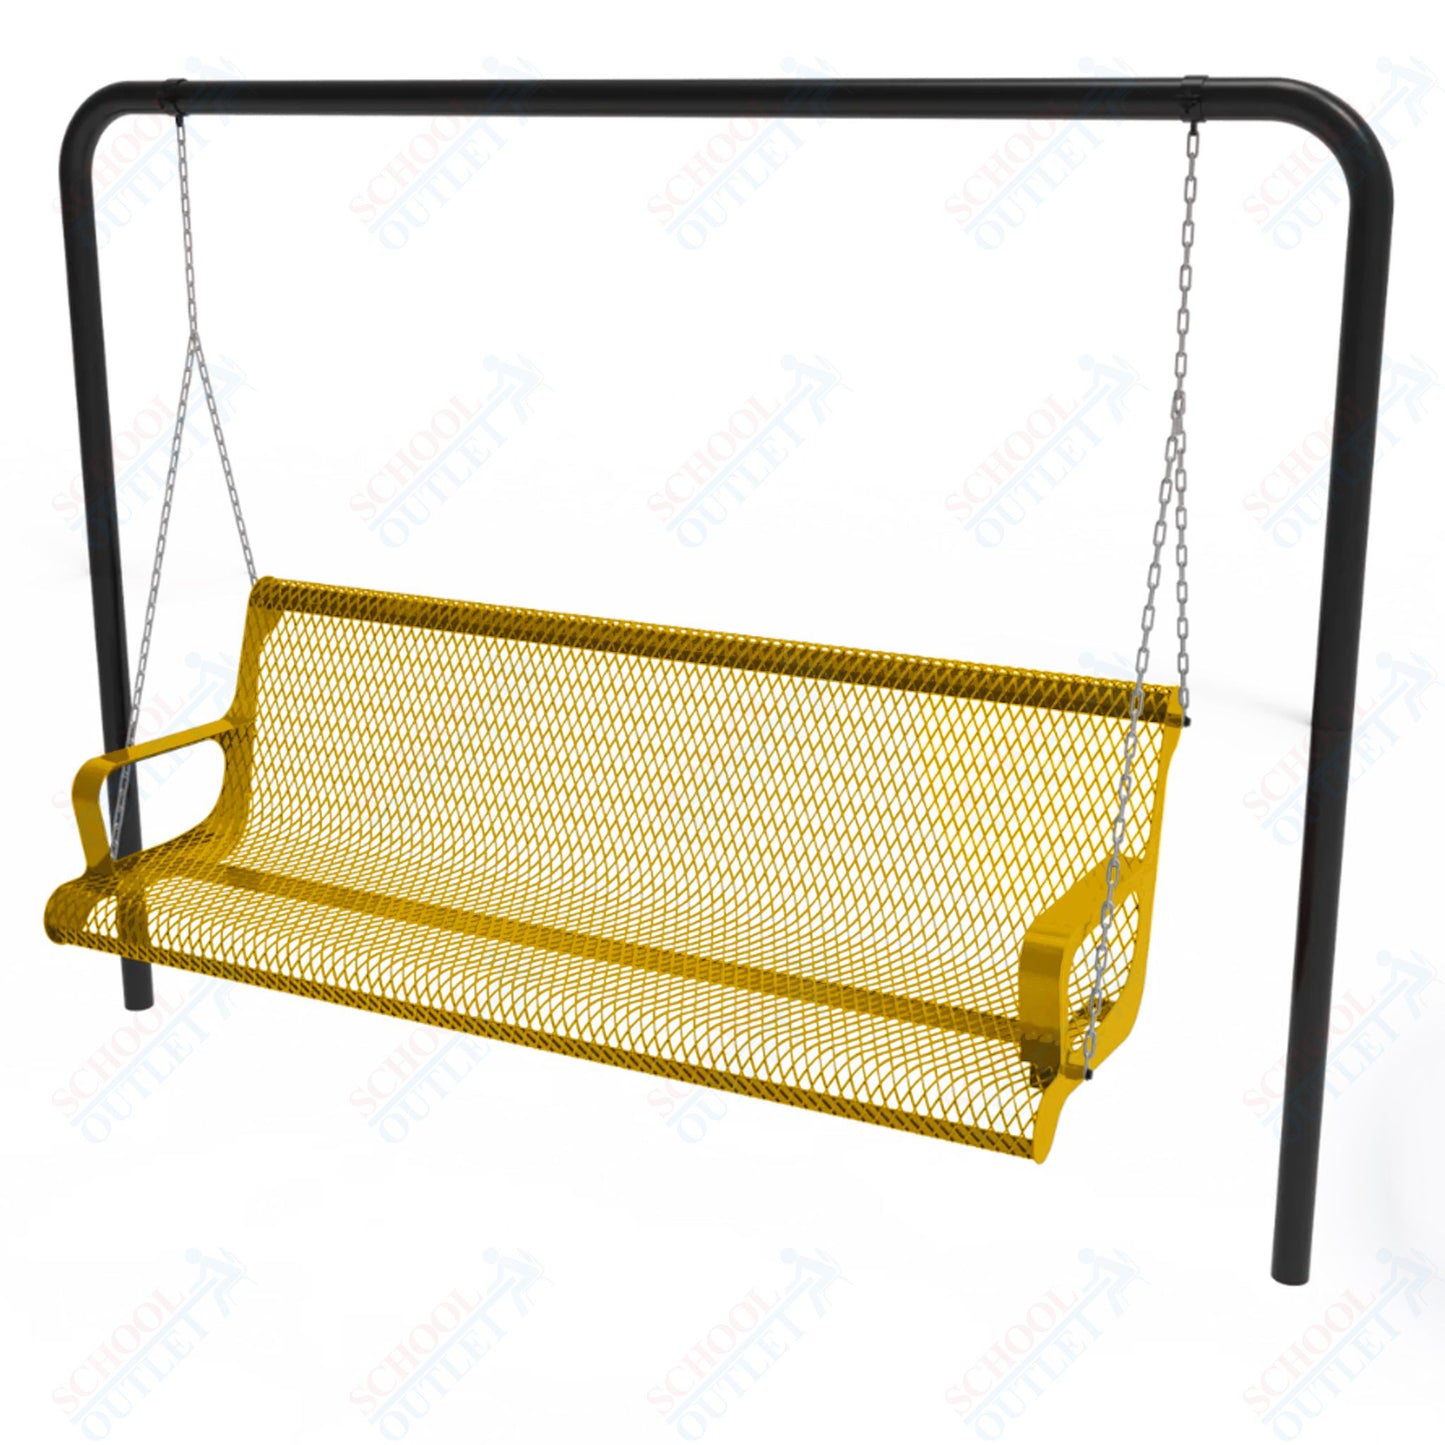 MyTcoat - Contoured Swing Outdoor Bench with Arm - Inground Mount 4' L (MYT-BCA04-68)